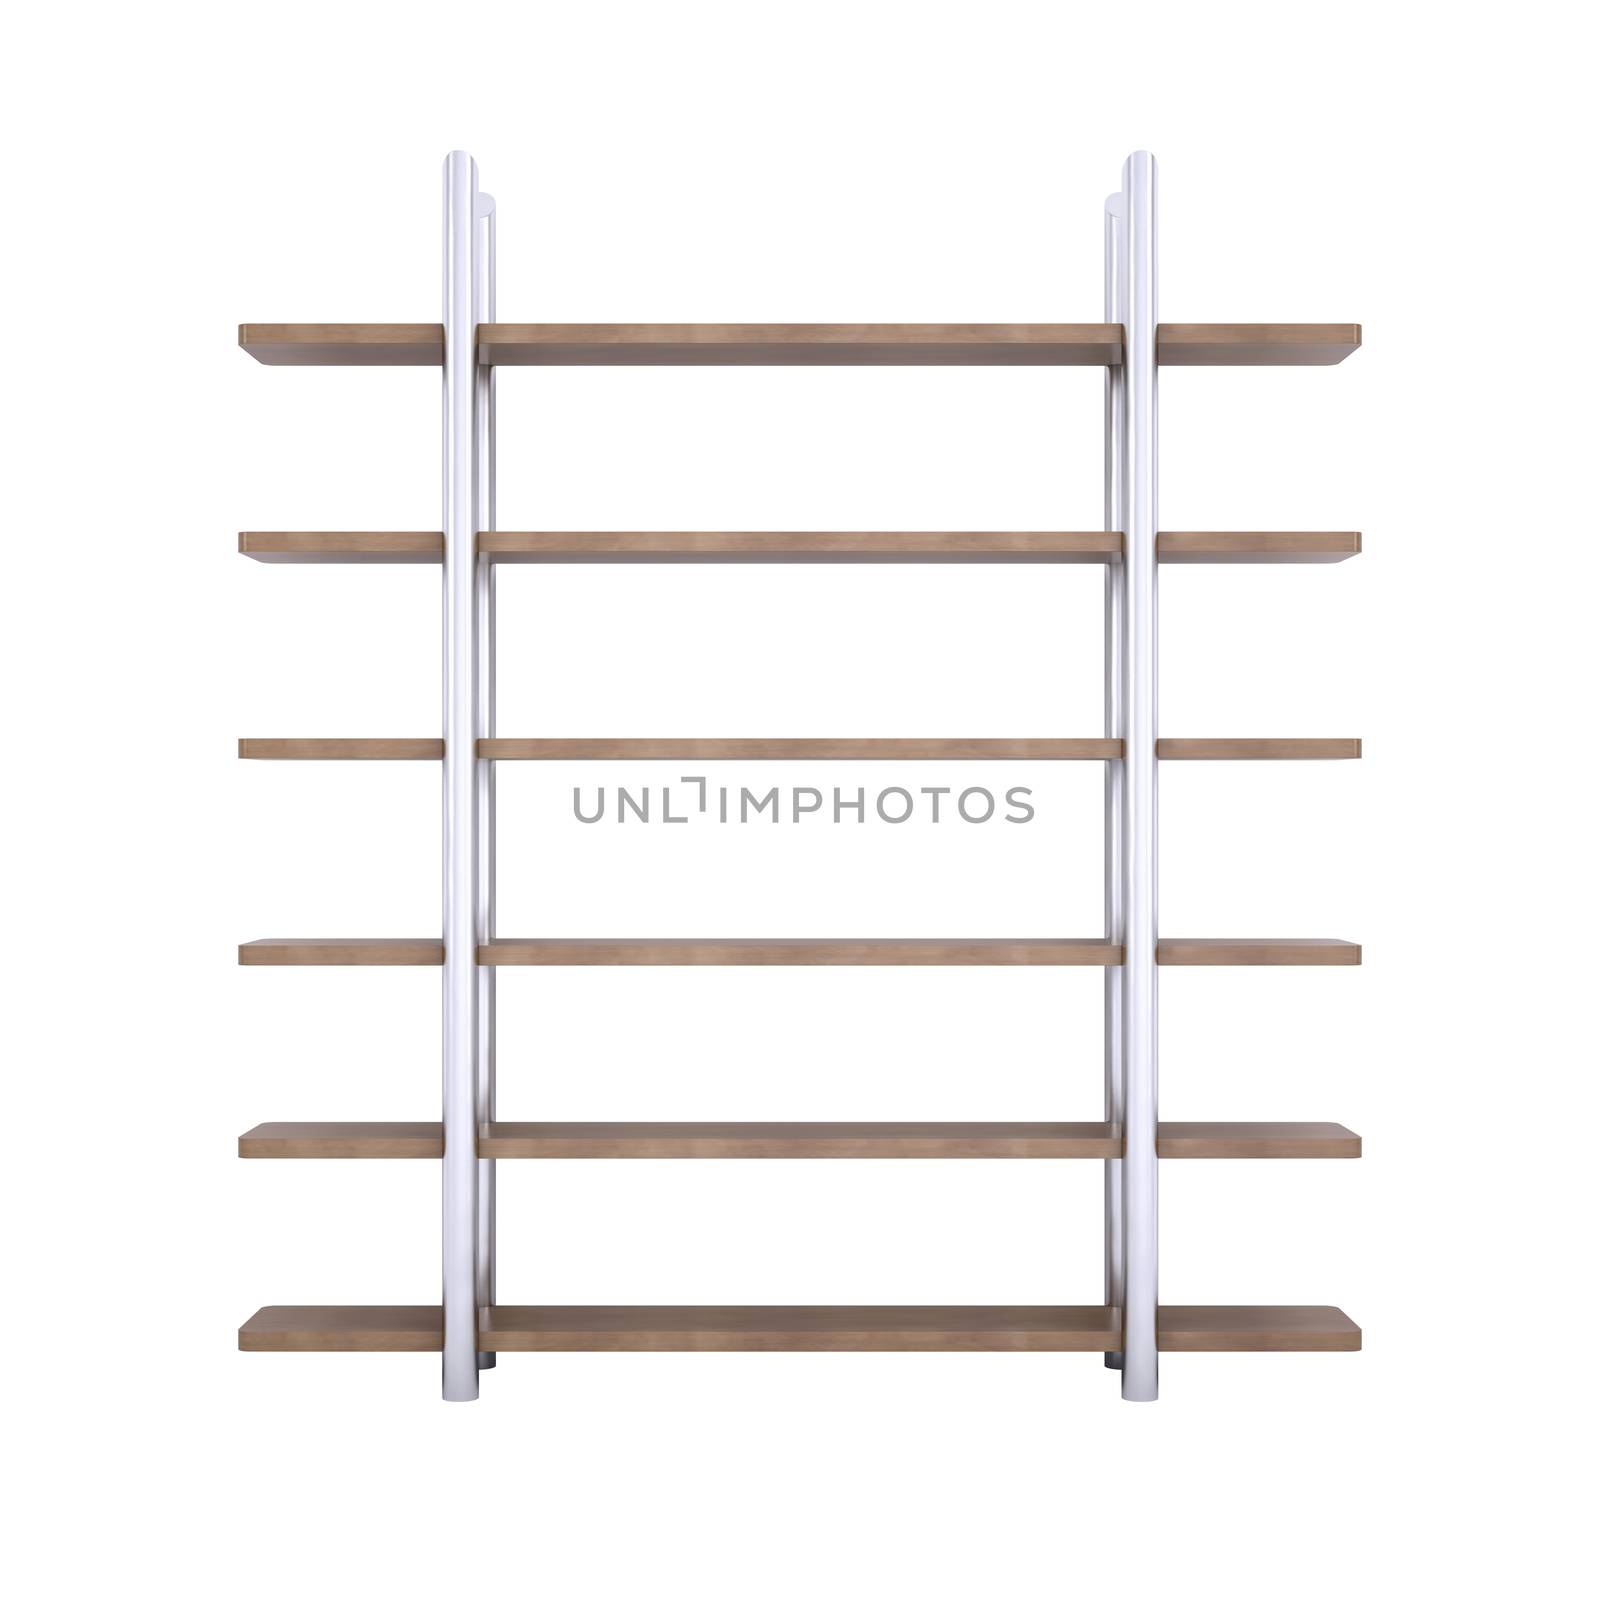 Wooden shelves with metal stands. 3d rendering on white background